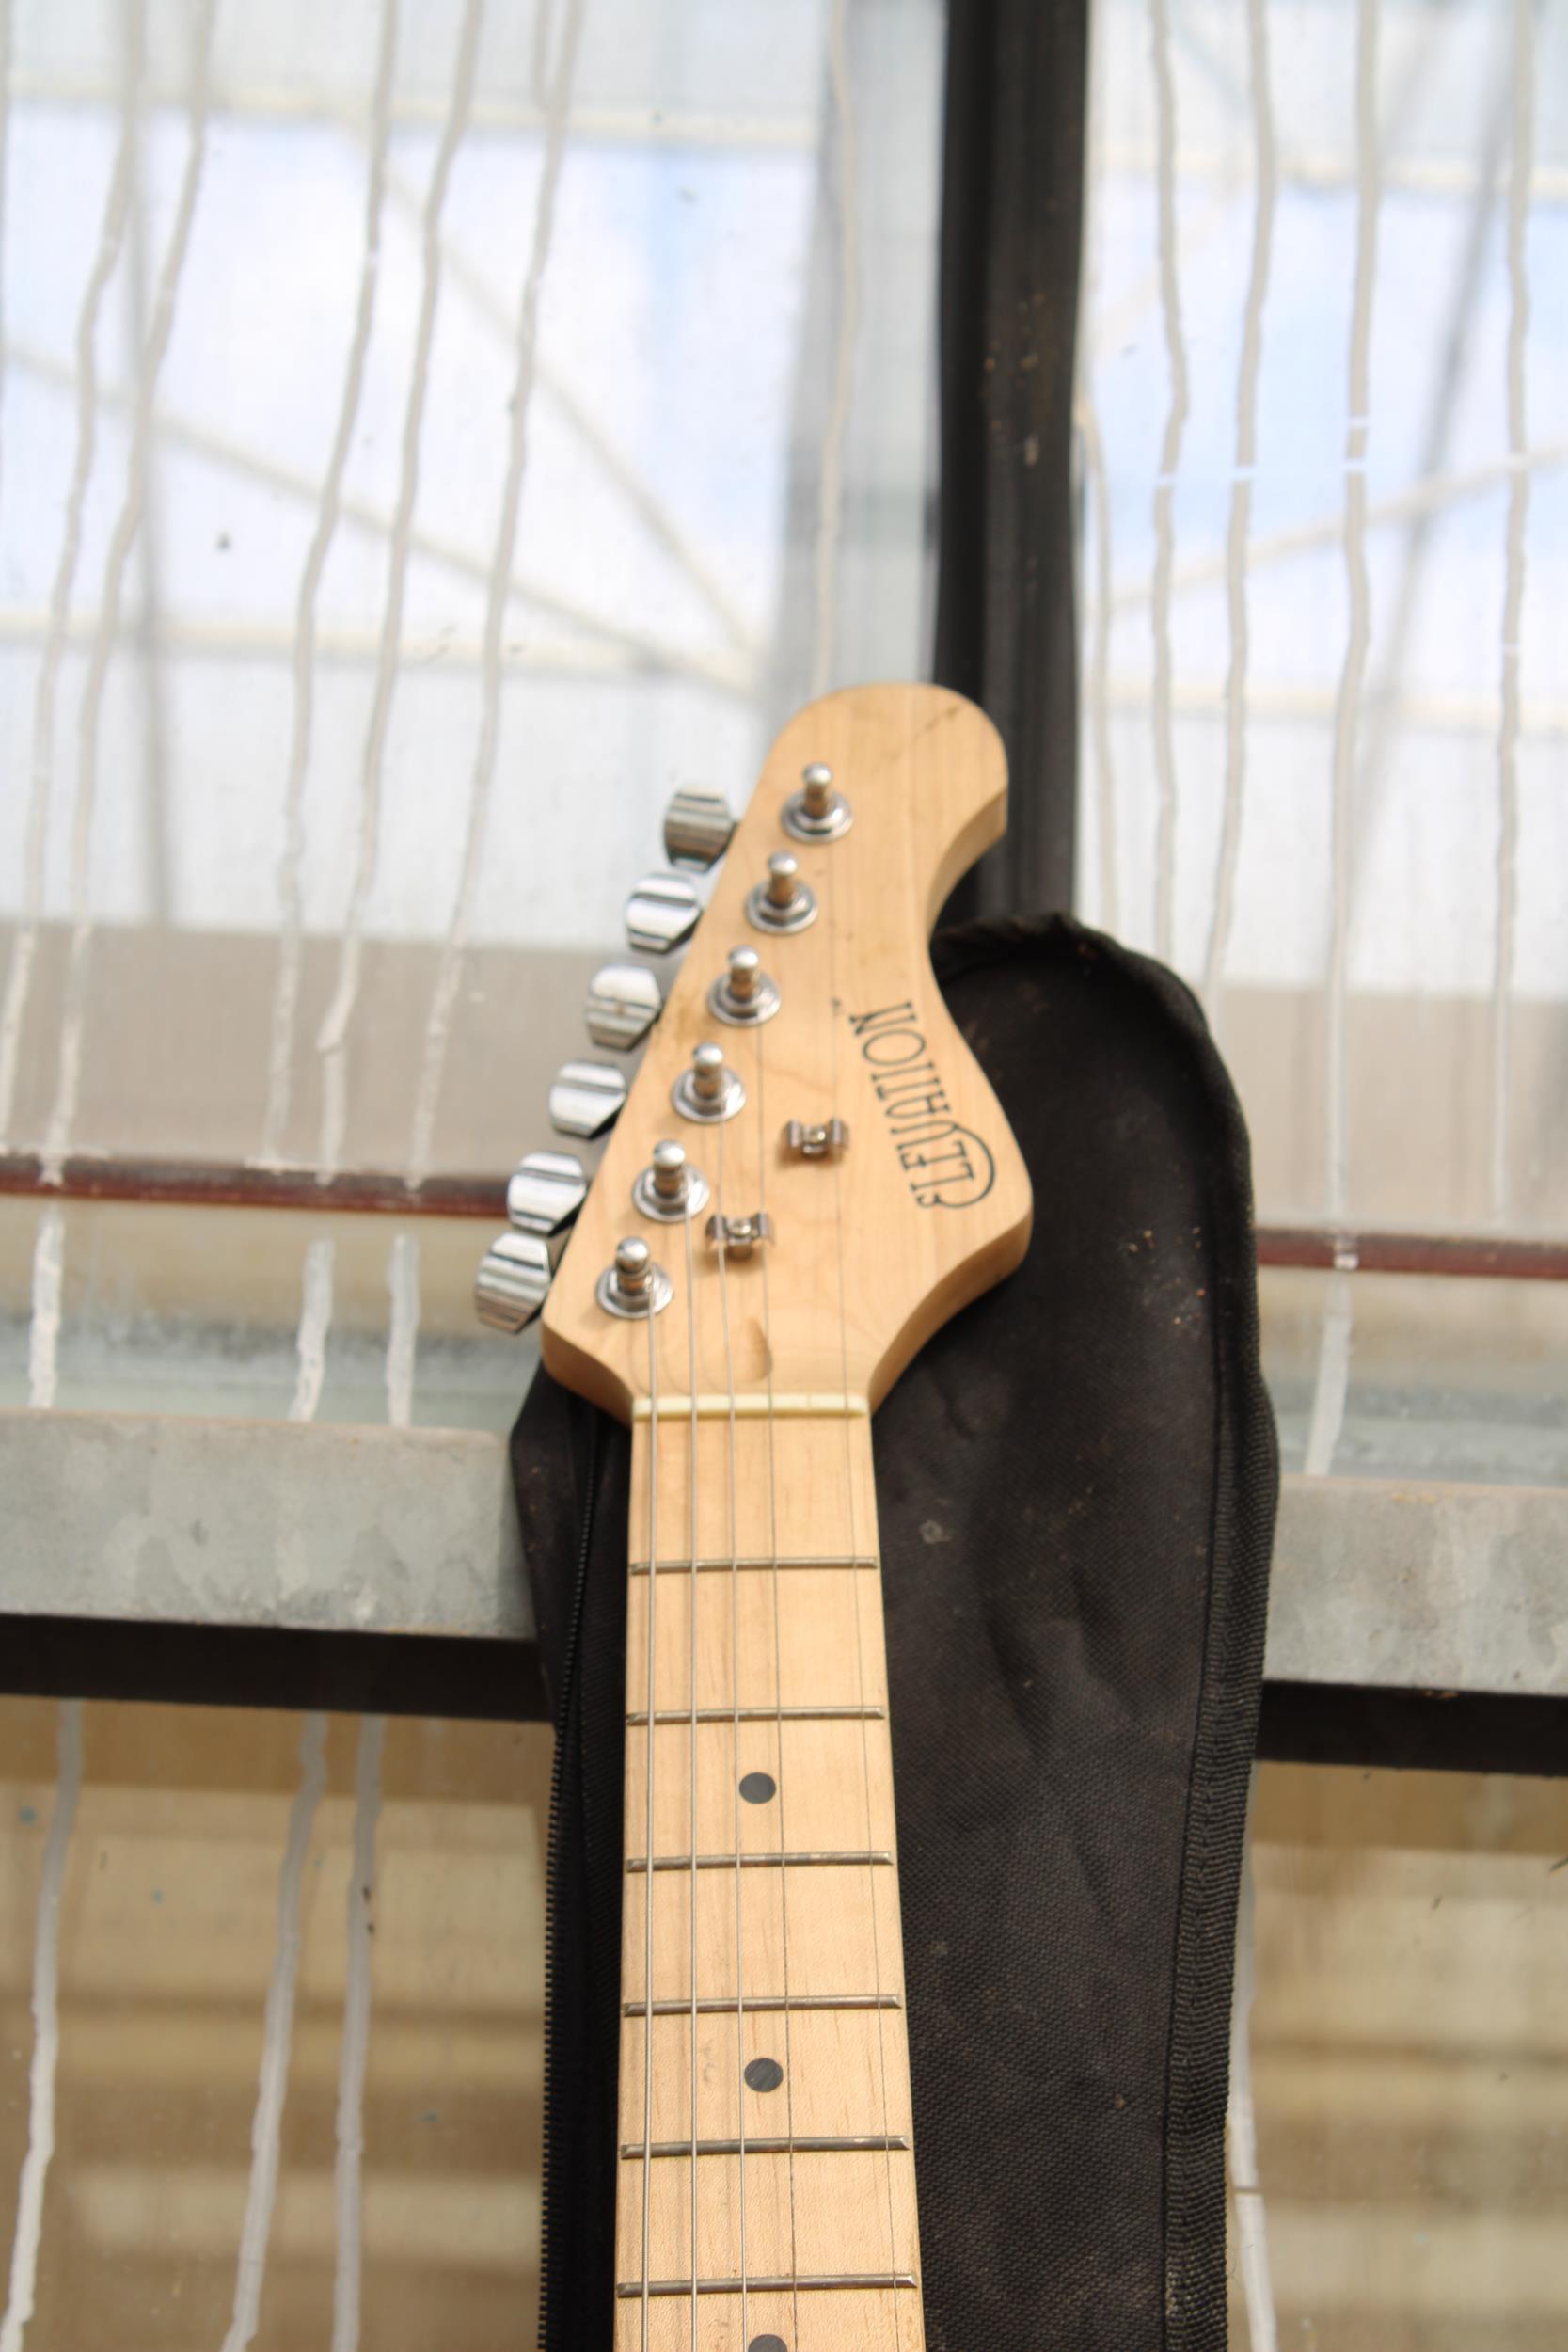 AN ELEVATION ELECTRIC GUITAR WITH CARRY CASE - Image 2 of 2